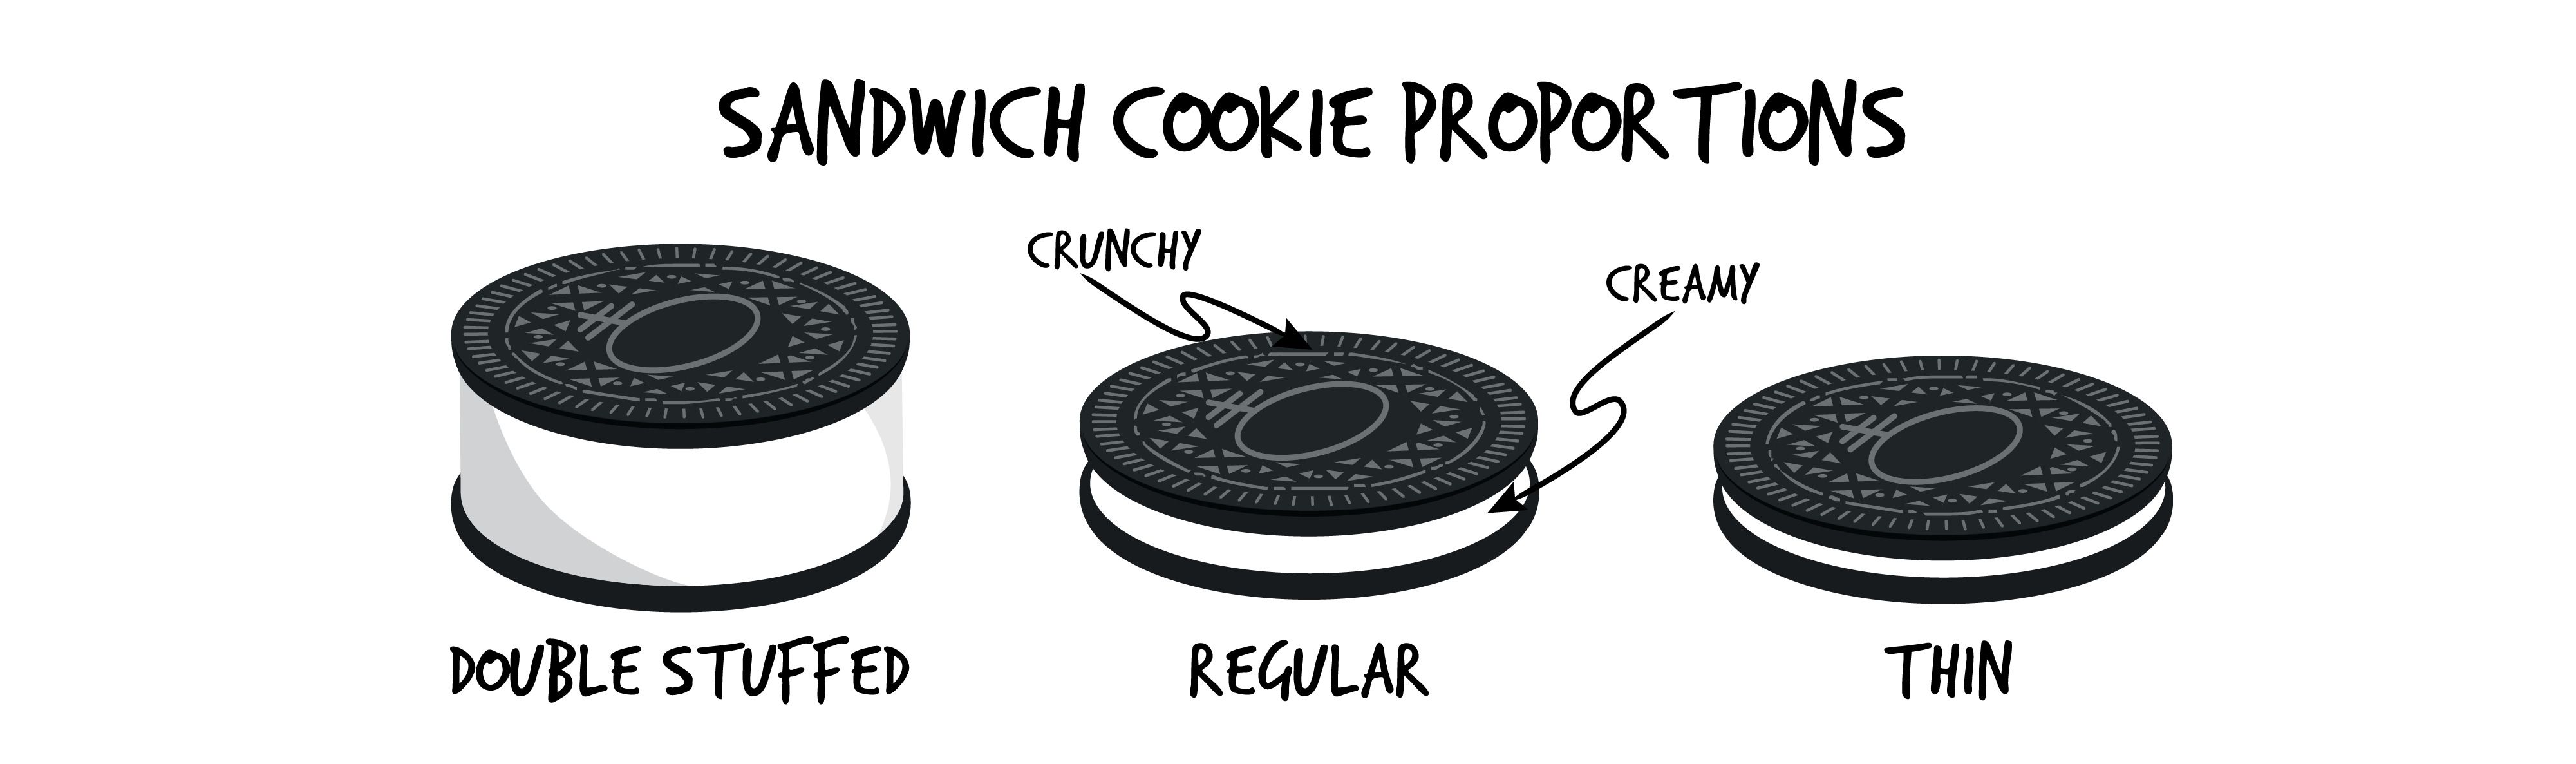 Title Sandwich Cookie Proportions. Side view of three Oreos. First has very thick layer of icing in between the two cookies. Text Double stuffed underneath. Second has an average layer of icing in between the two cookies. Text Regular underneath, Crunchy with arrow pointing to cookie and Creamy pointing to icing. Third has a thin layer of icing in between two cookies. Text Thin underneath.